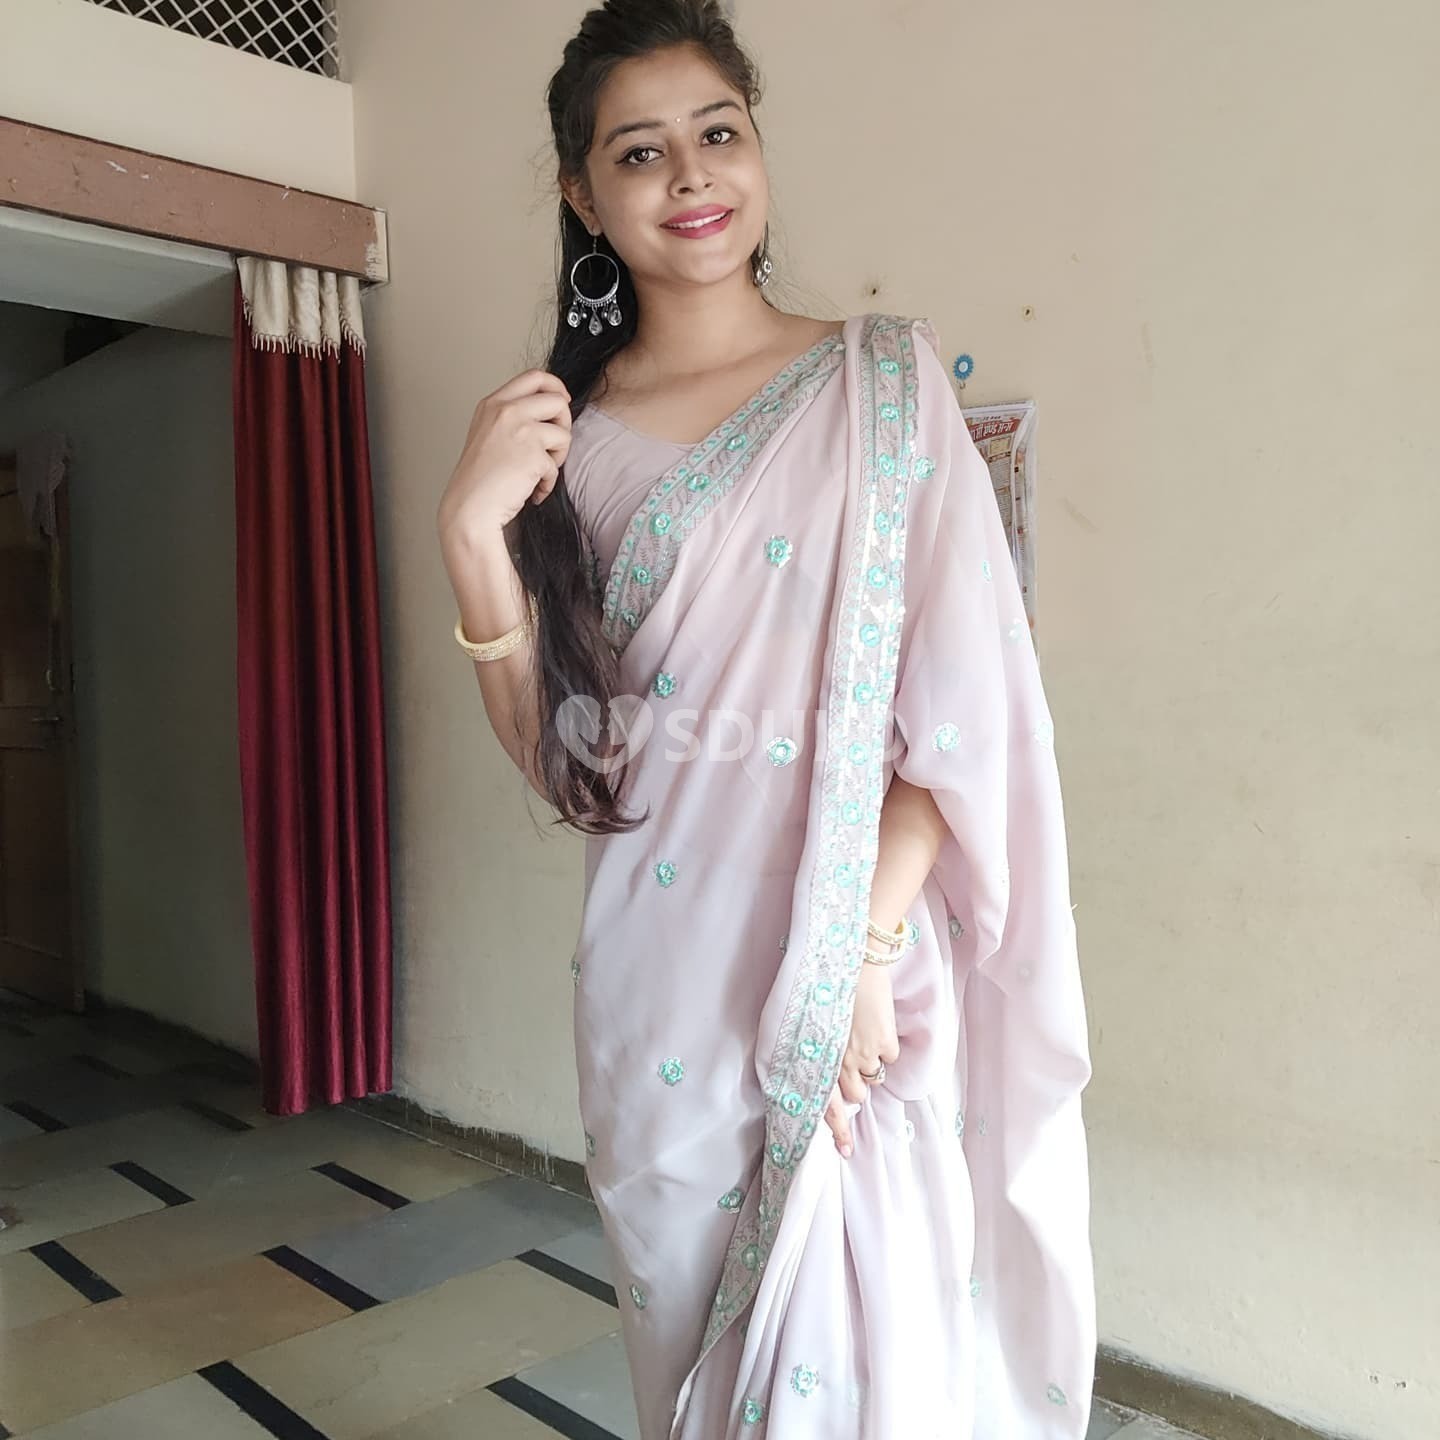 BANGLORE LOW PRICE 100% SAFE AND SECURE INDIPENDENT CALL GIRL ESCORT INCALL//OUTCALL SERVICE AVAILABLE